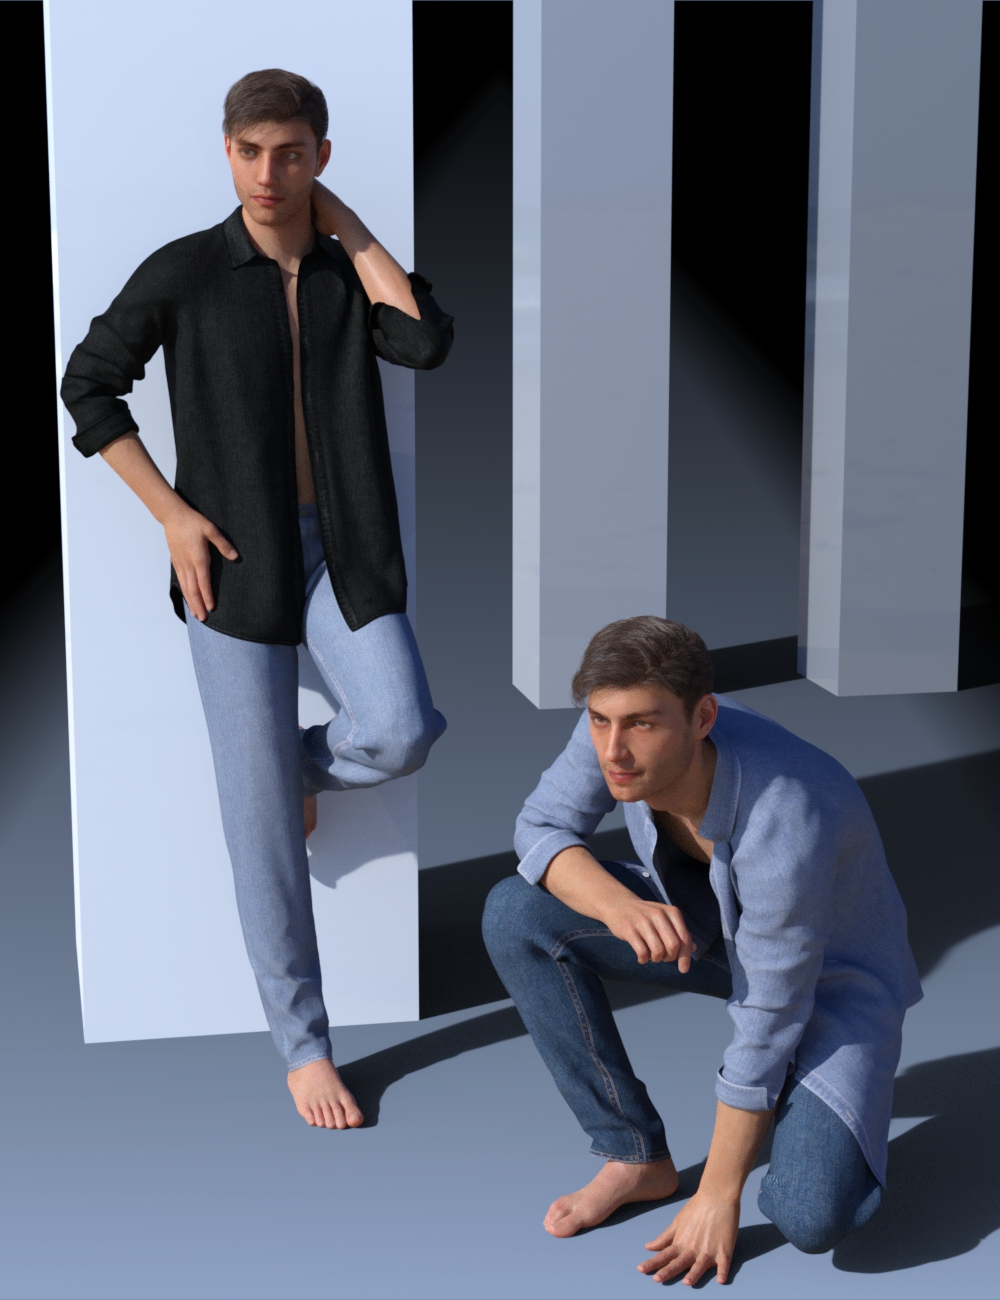 dForce My Guy Jeans and Shirt for Genesis 8 Male by: Aave NainenIDG DesignsDestinysGarden, 3D Models by Daz 3D